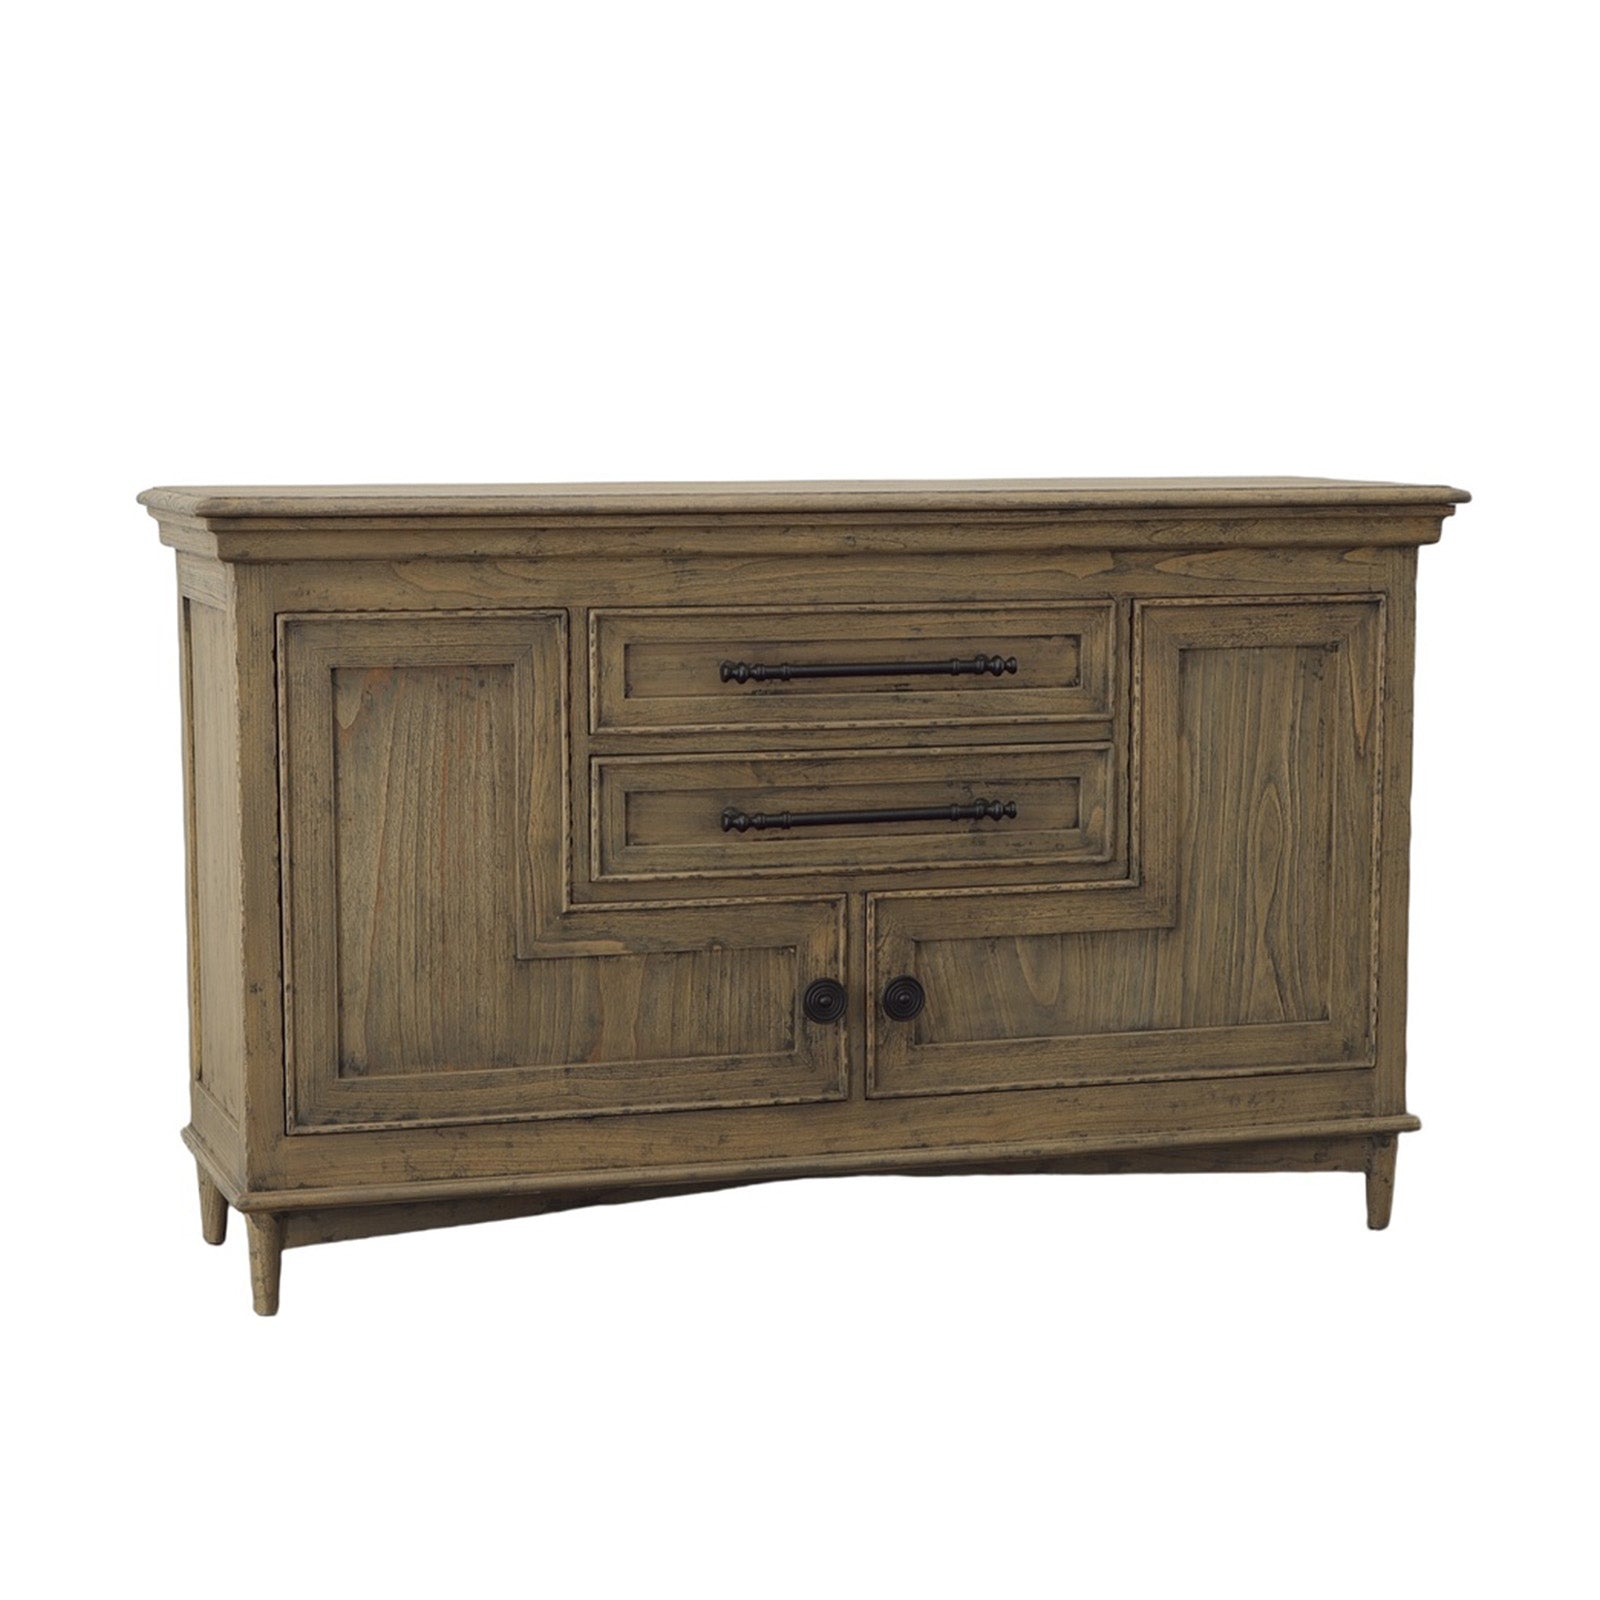 Luxely Sideboard